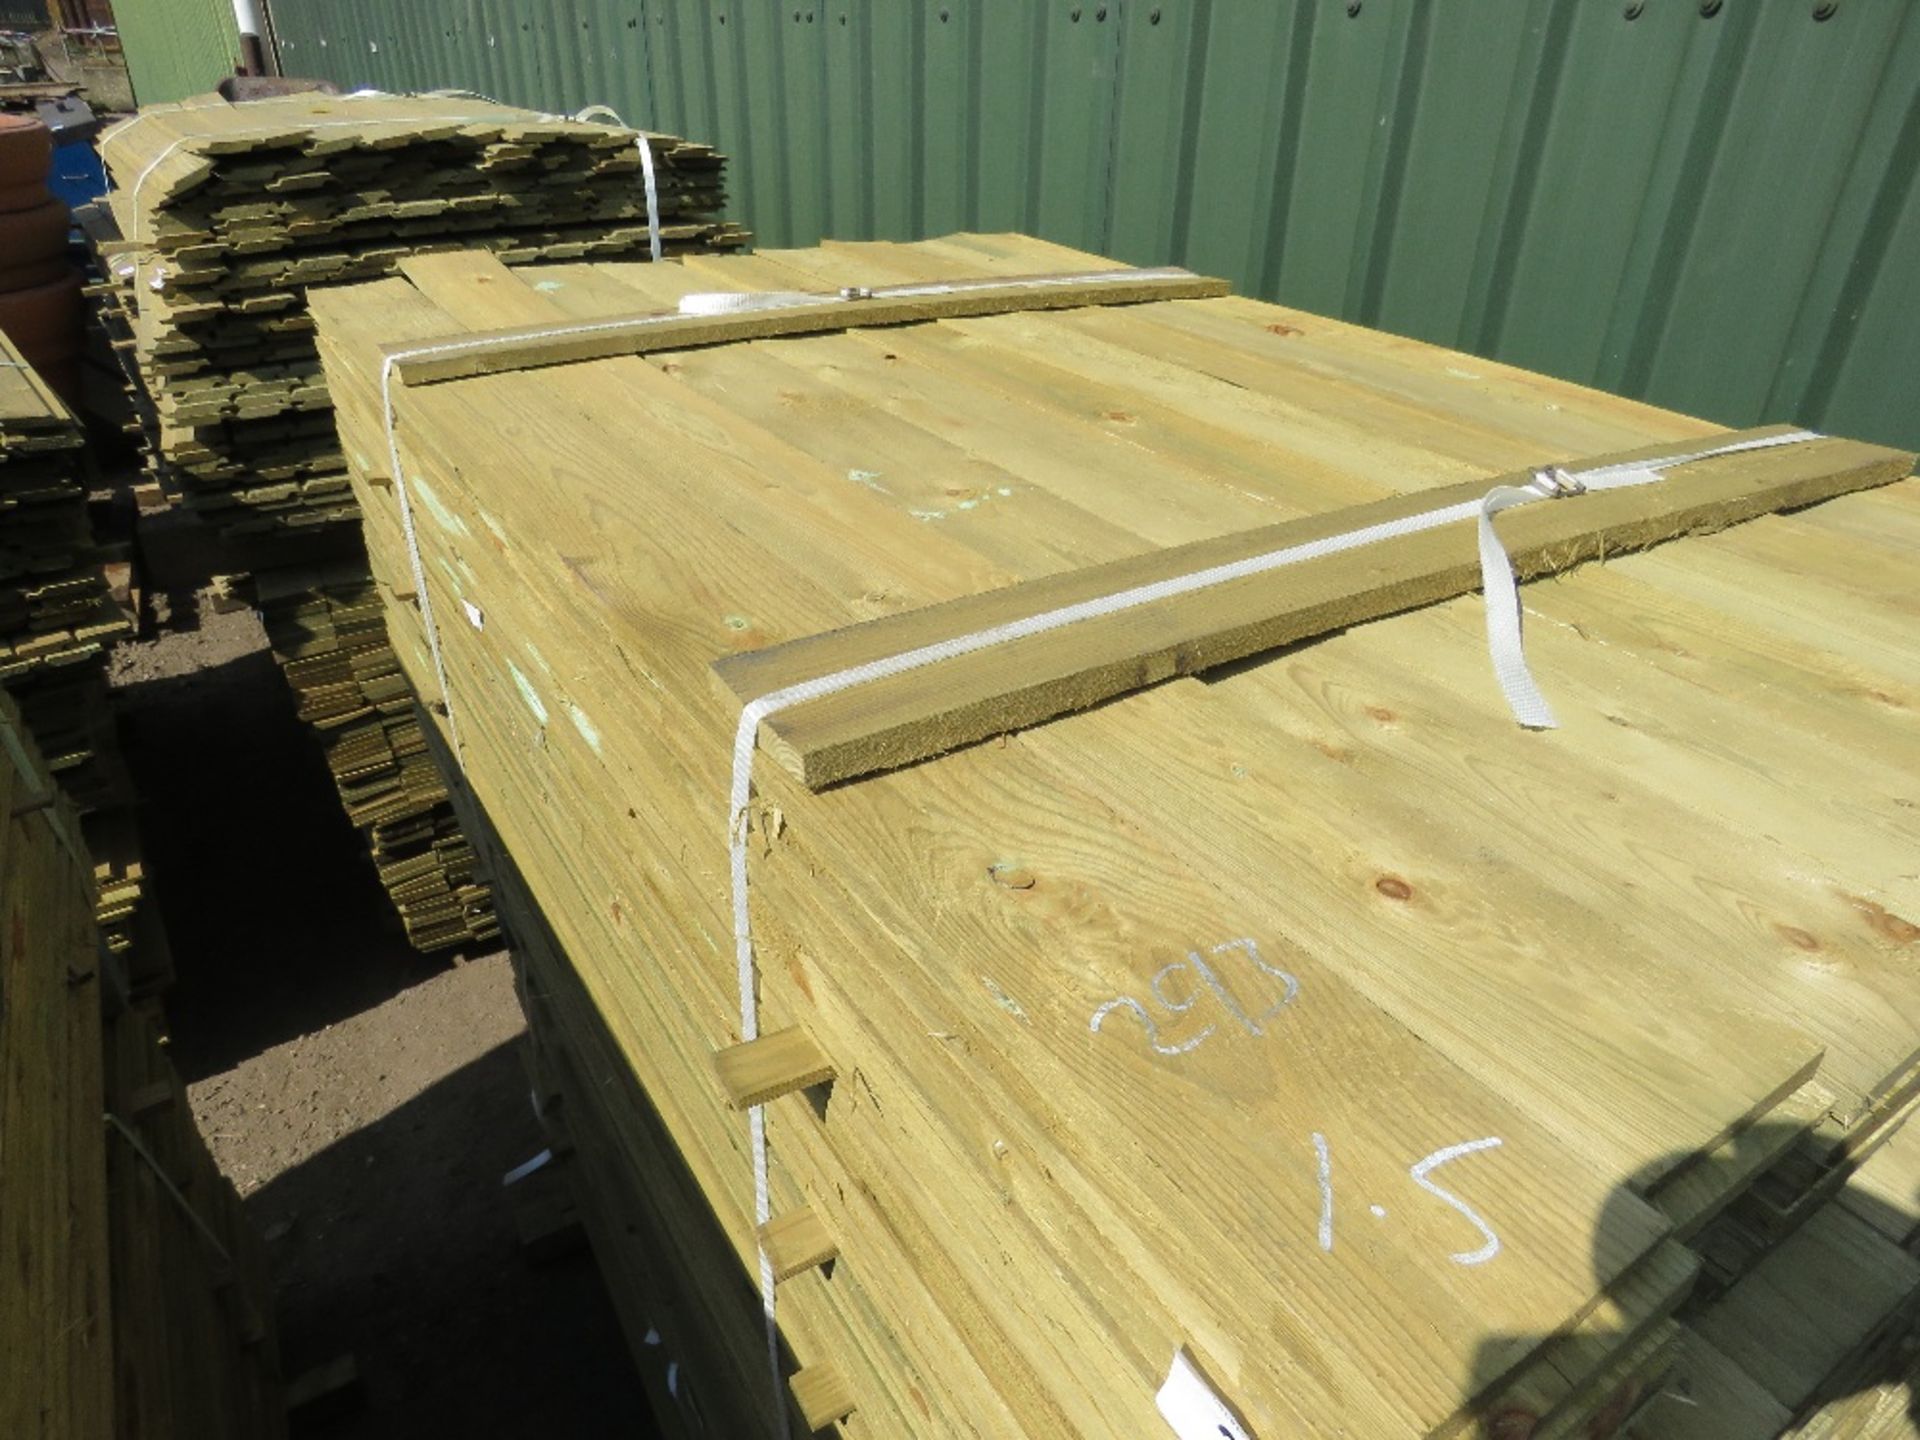 PACK OF PRESSURE TREATED FEATHER EDGE TIMBER FENCE CLADDING BOARDS, 1.5M LENGTH X 10.5CM WIDTH APPRO - Image 2 of 2